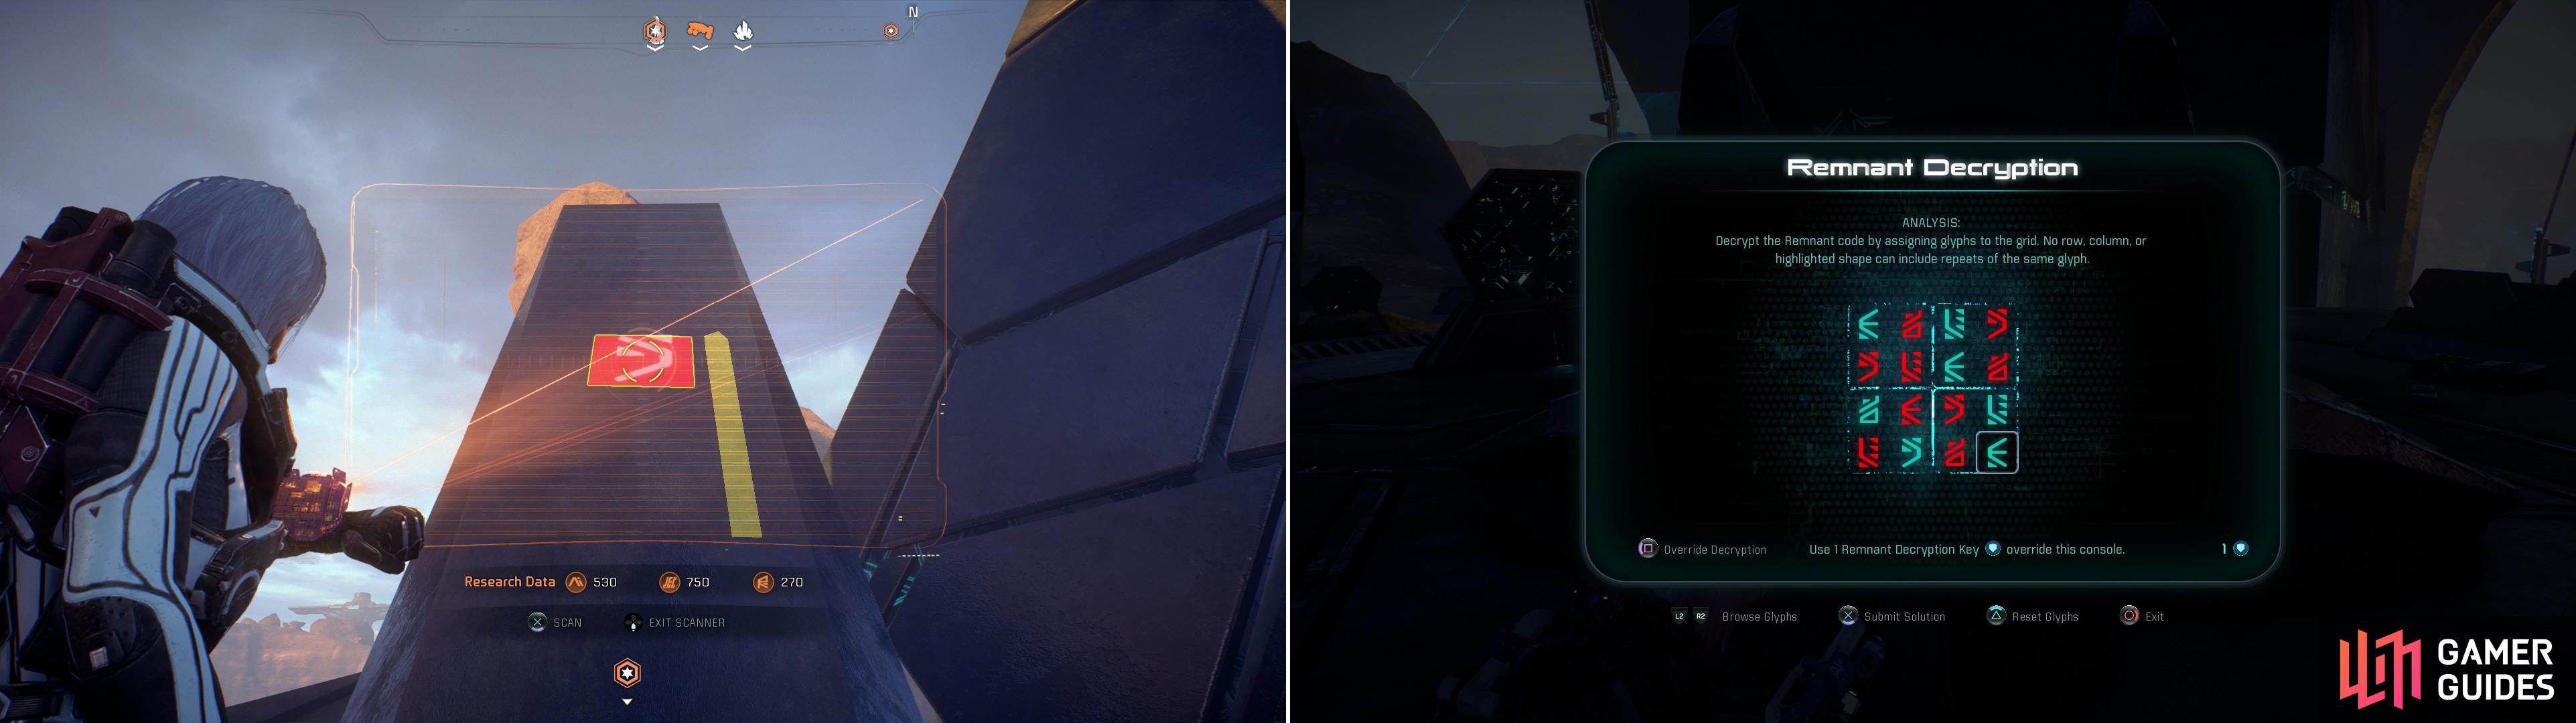 Follow conduits to track down and use Remnant Consoles to reach glyphs (left), then complete the Remnant puzzle to activate the second monolith (right).